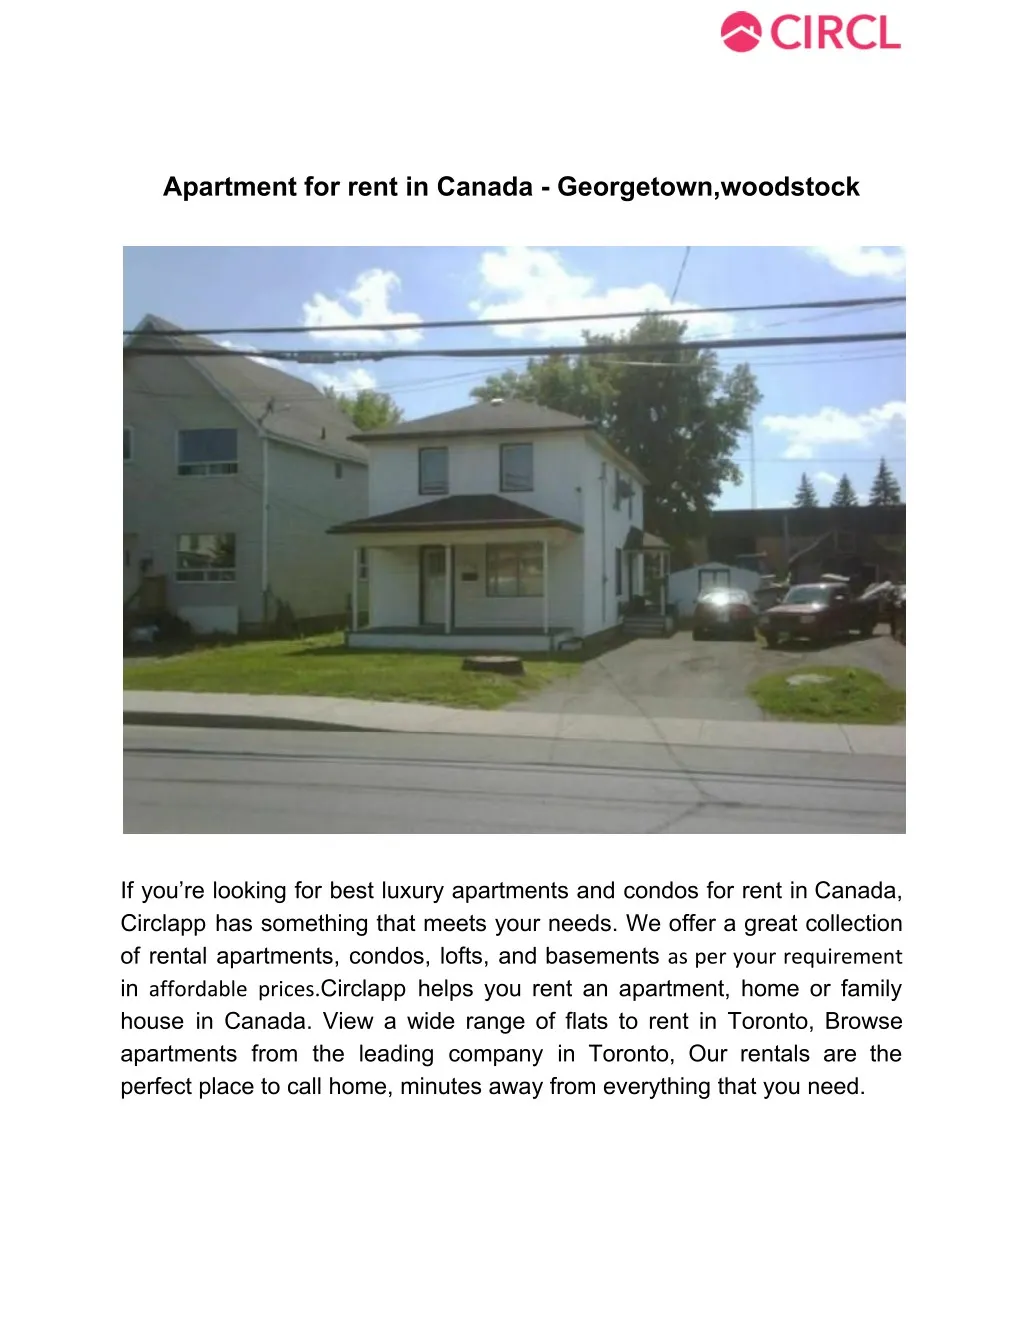 apartment for rent in canada georgetown woodstock